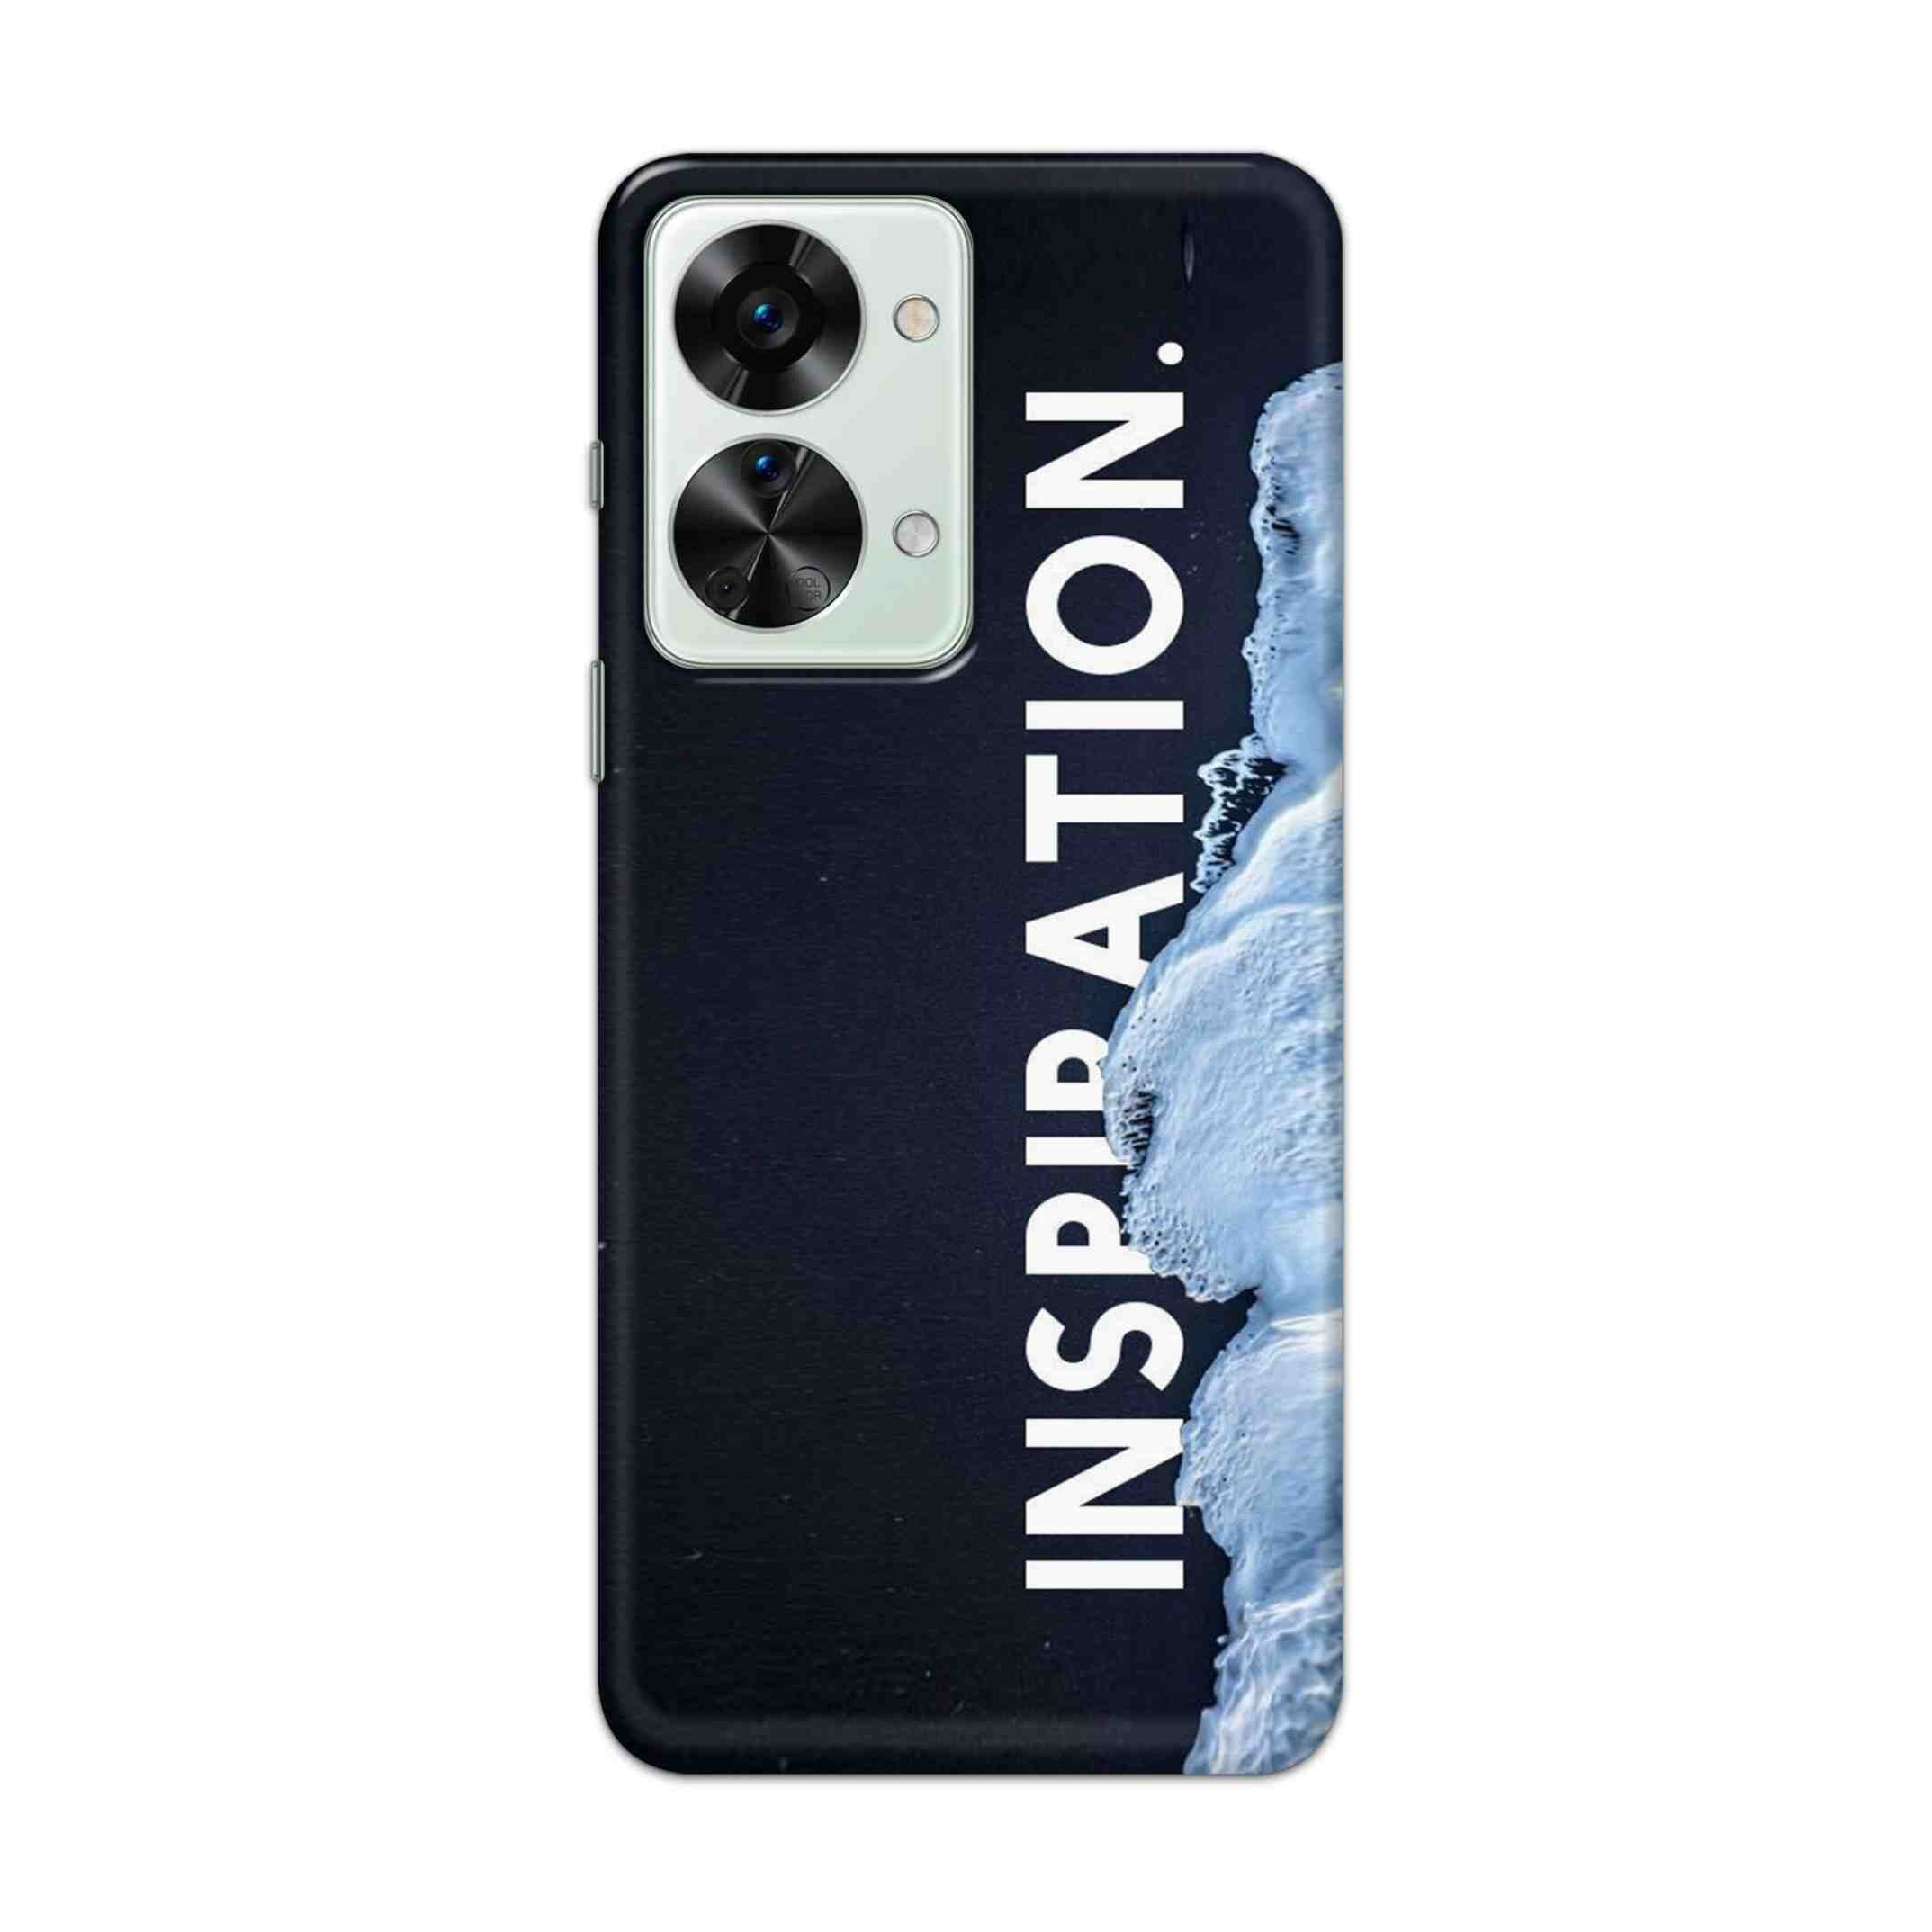 Buy Inspiration Hard Back Mobile Phone Case Cover For OnePlus Nord 2T 5G Online